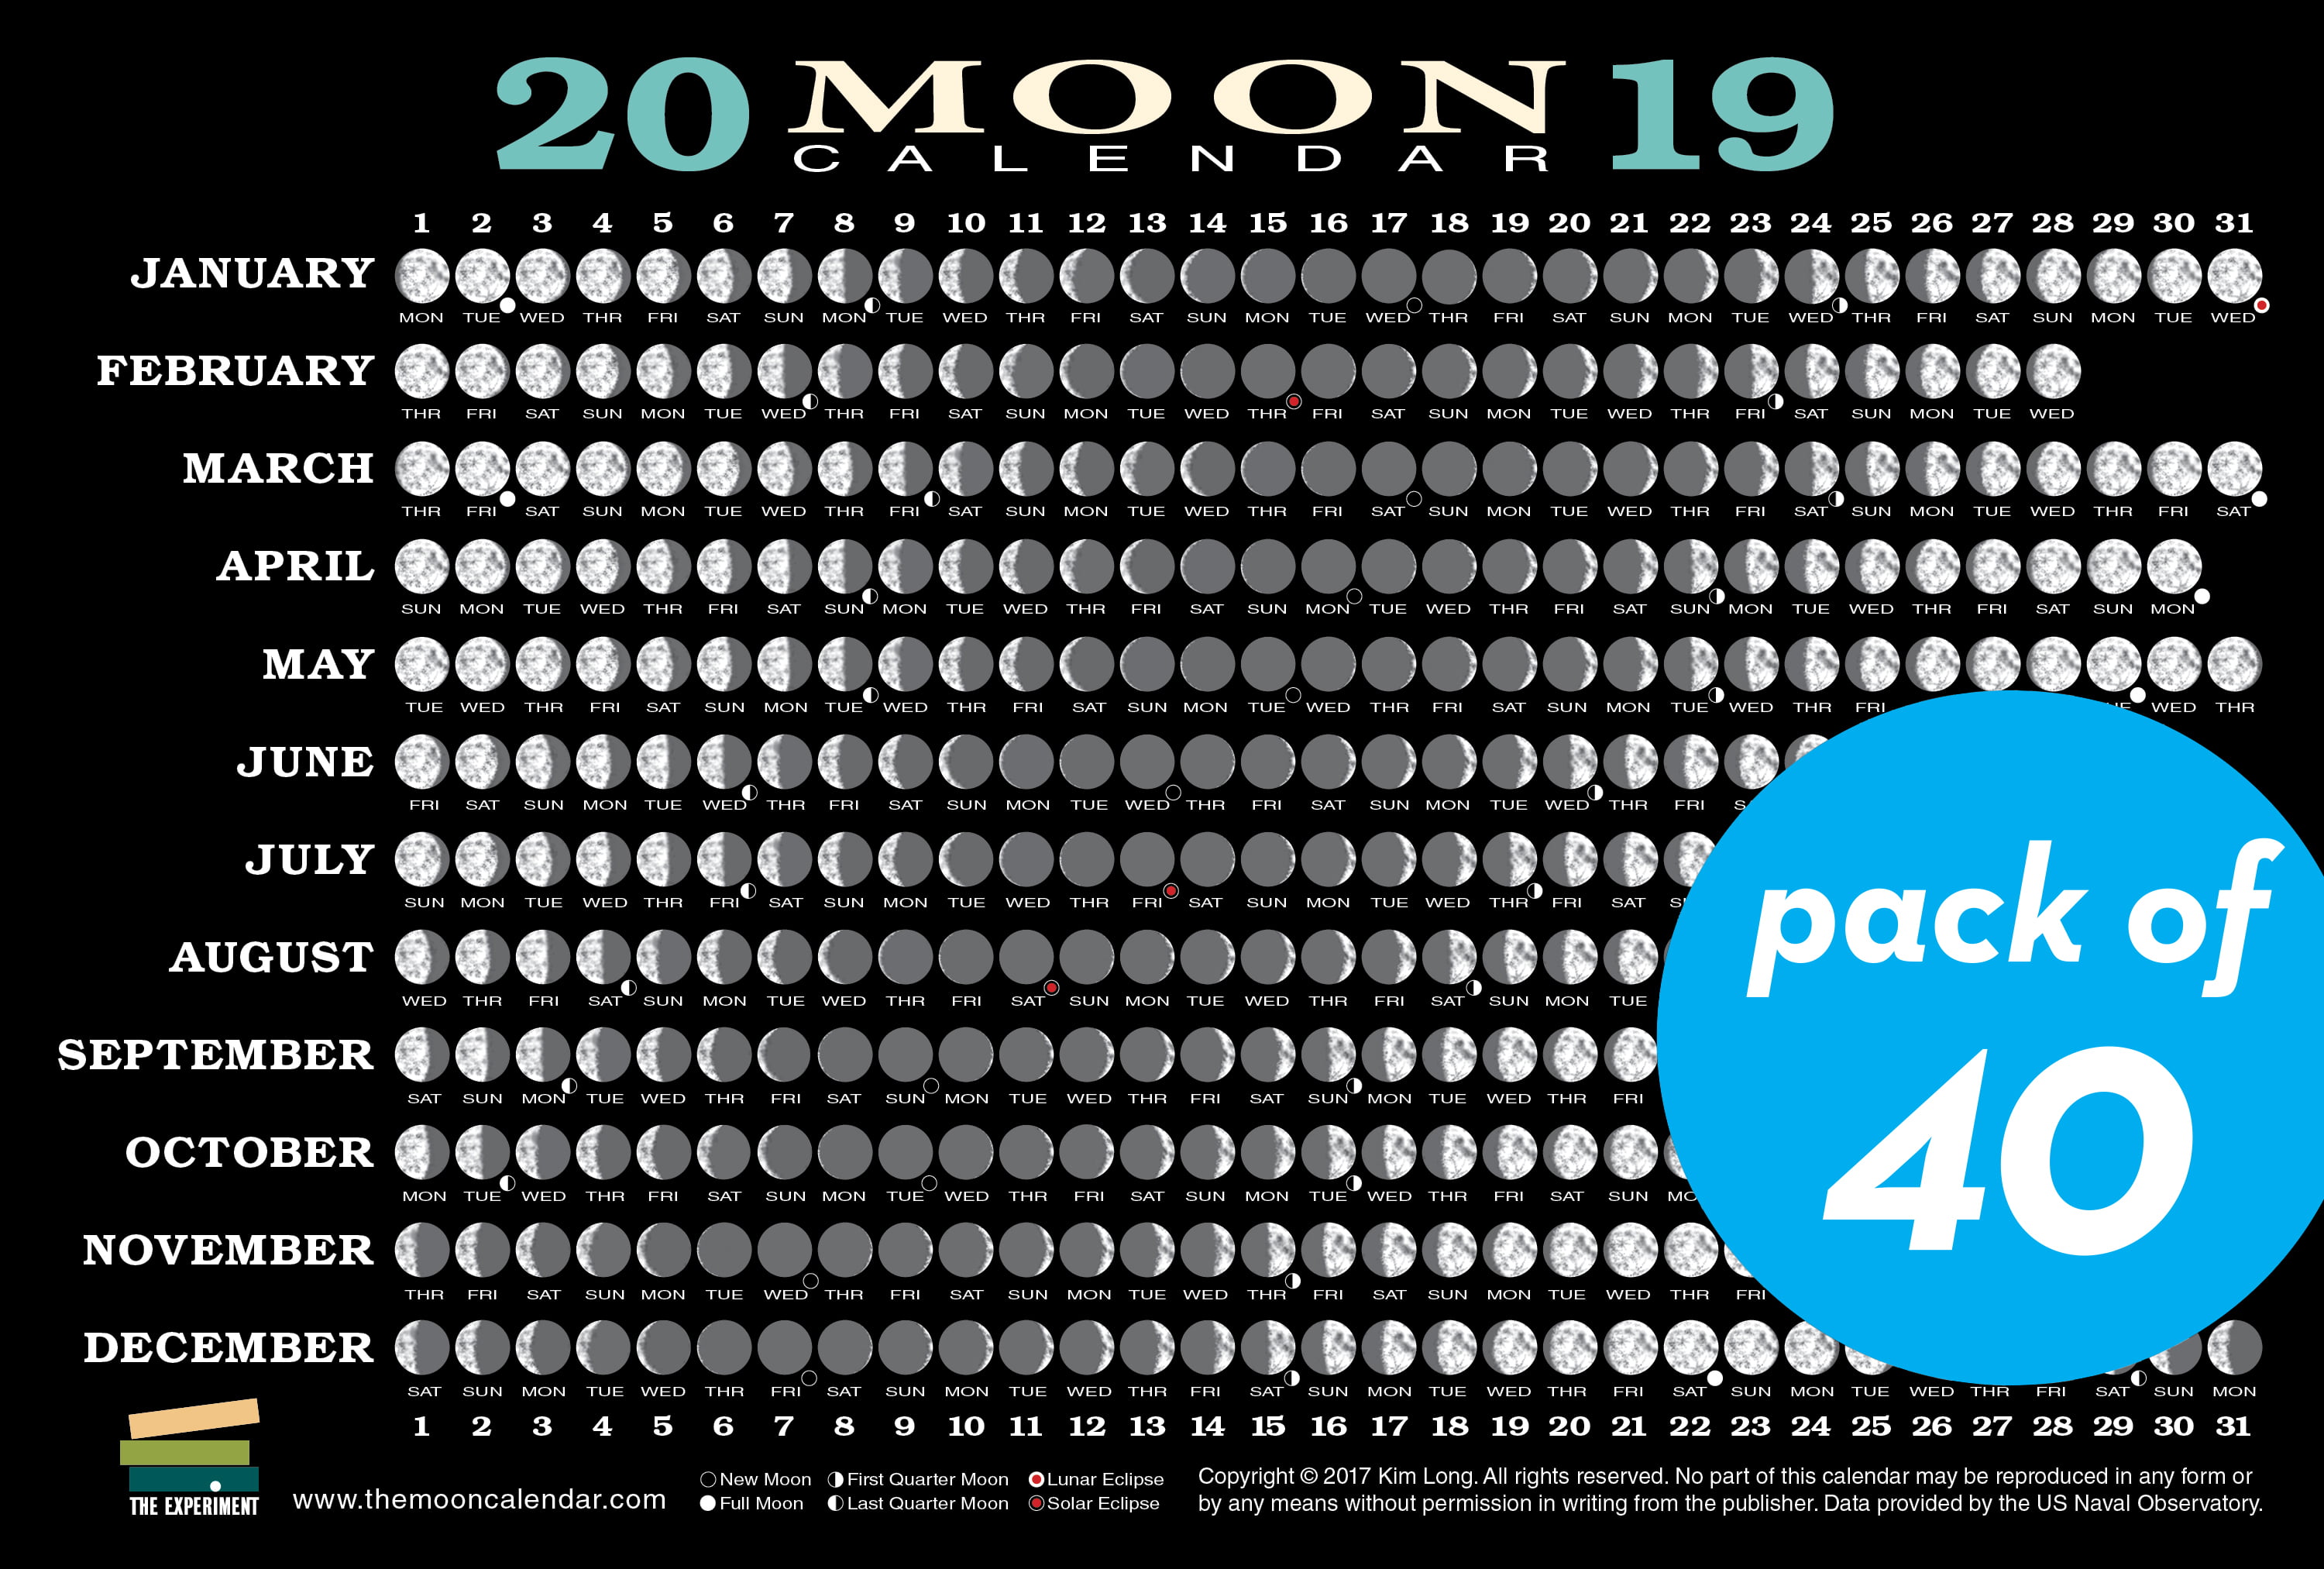 2019-moon-calendar-card-40-pack-lunar-phases-eclipses-and-more